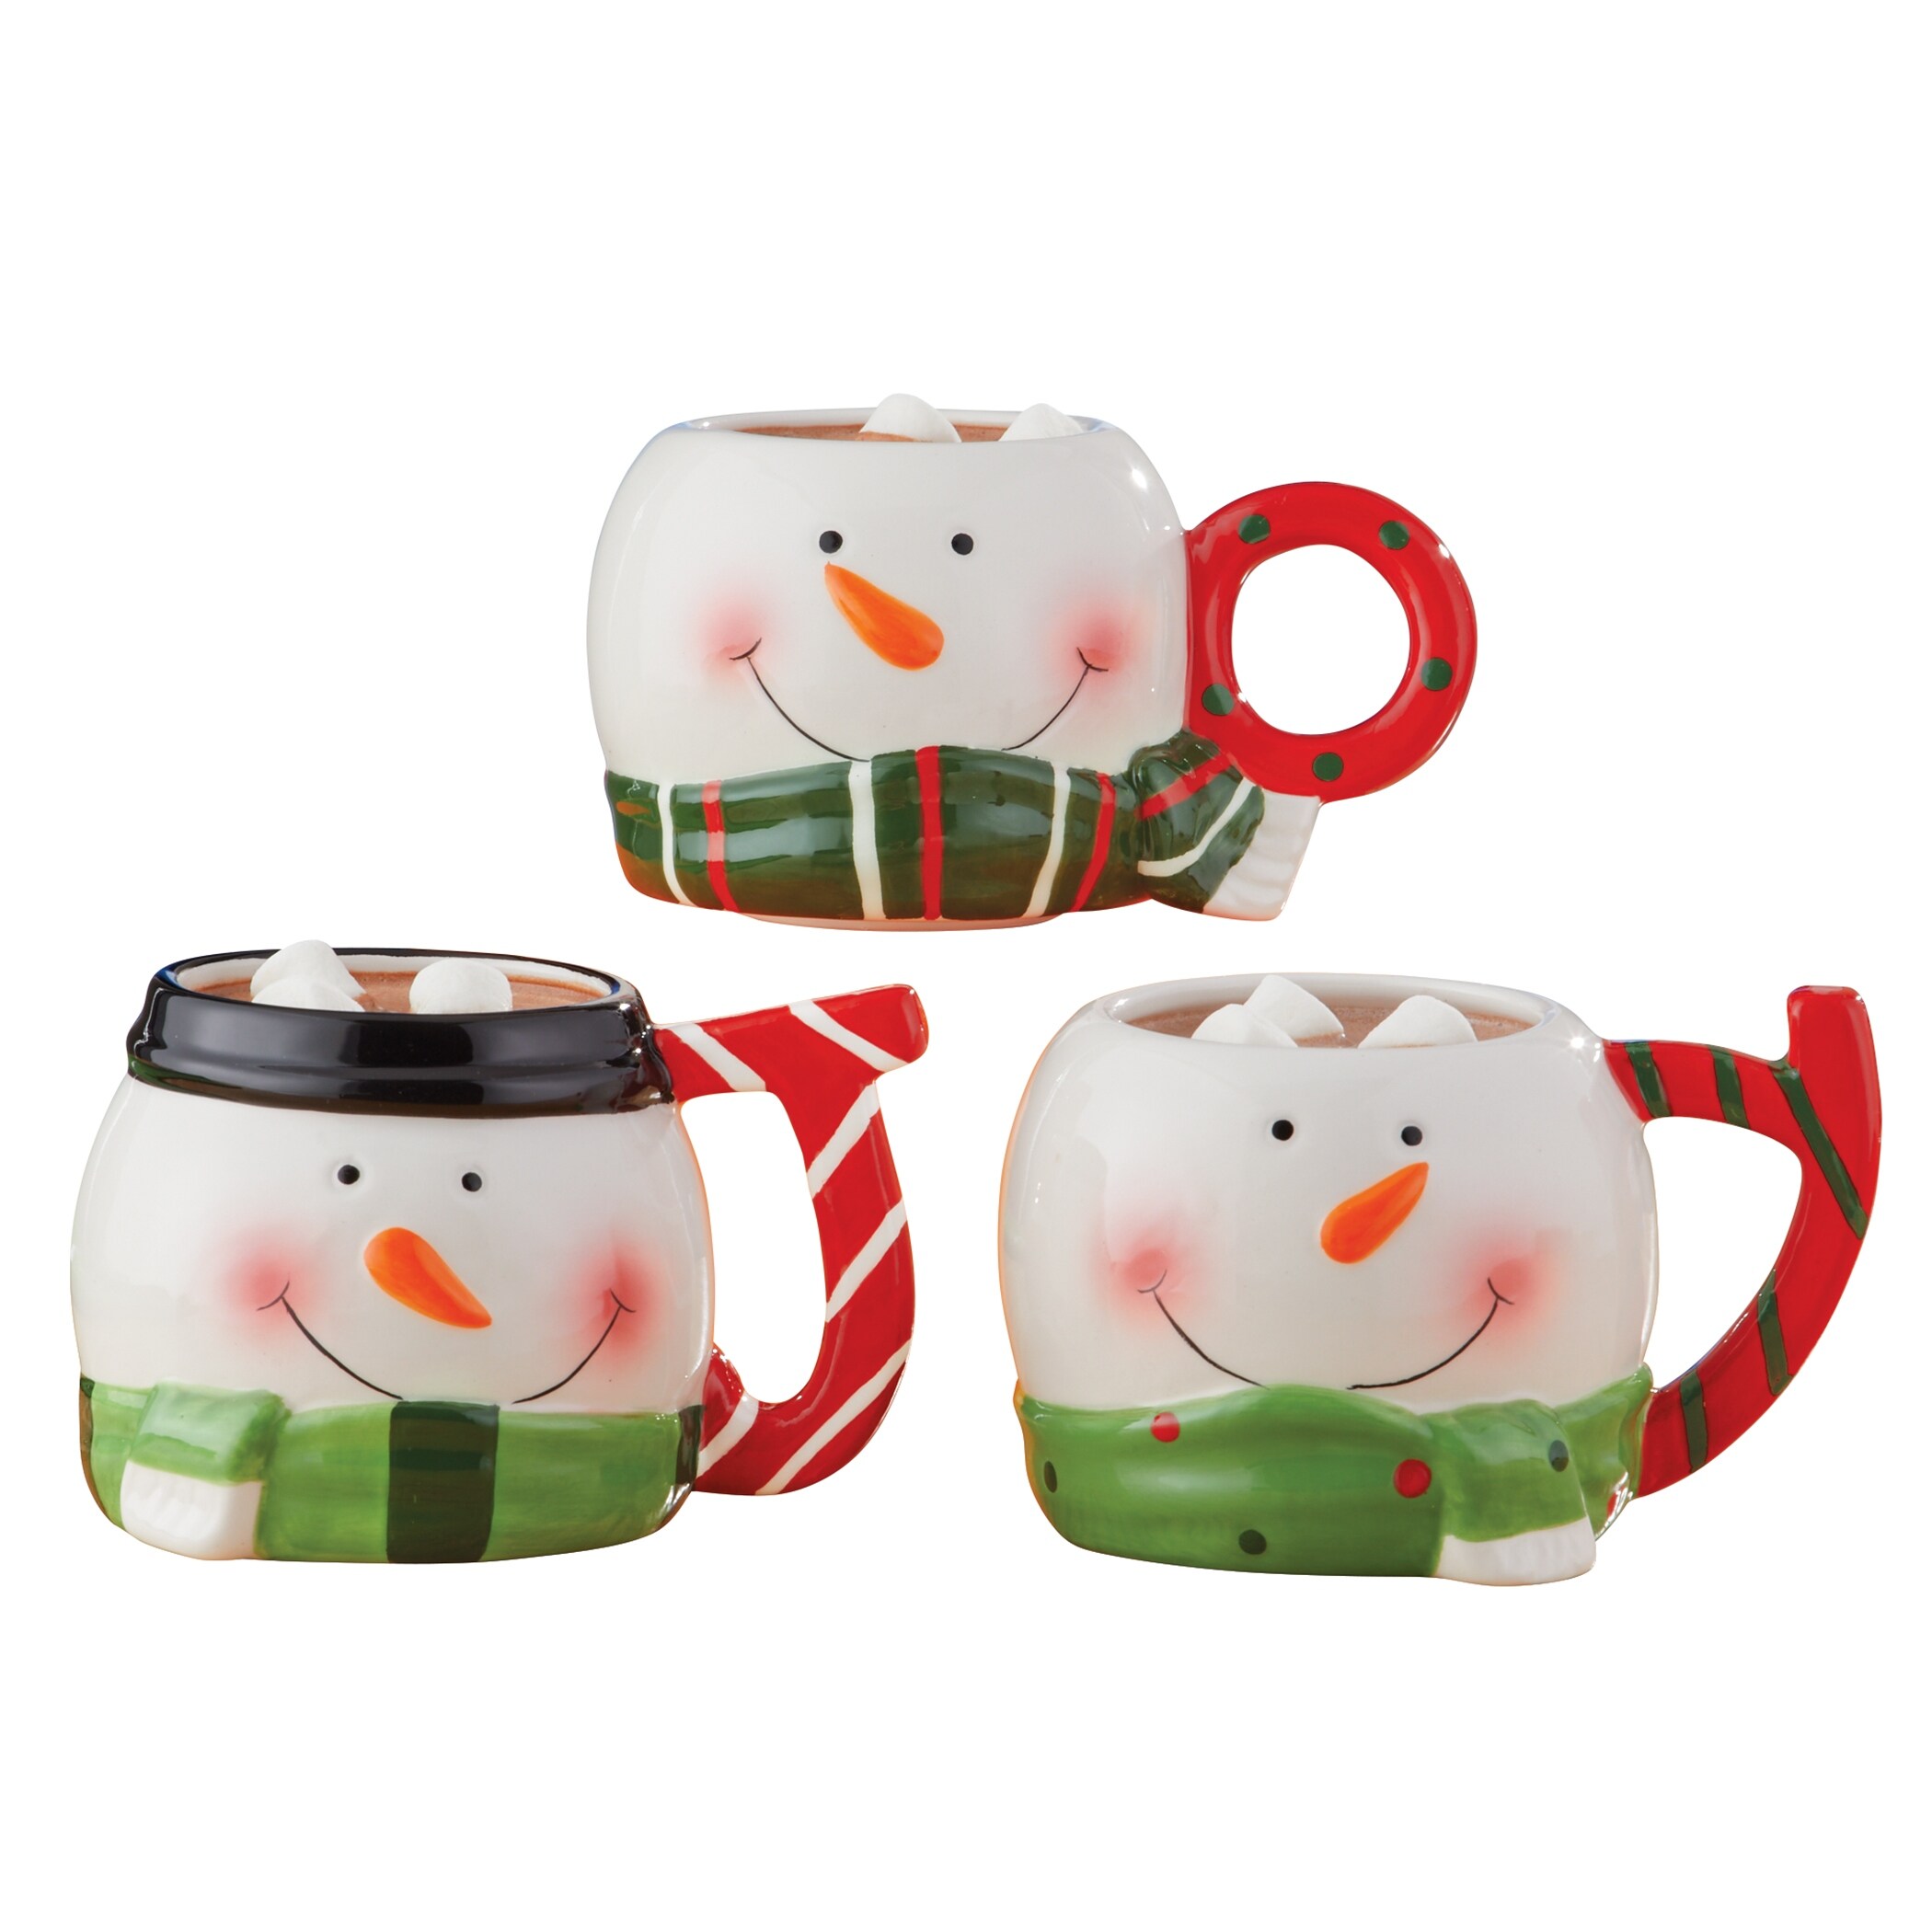 Decorative Christmas Holiday Themed Plastic Containers Jars with Stackable Lids for Cookies, Snacks, Candies, Treats Gnomes, Gingerbread Men, Snowmen